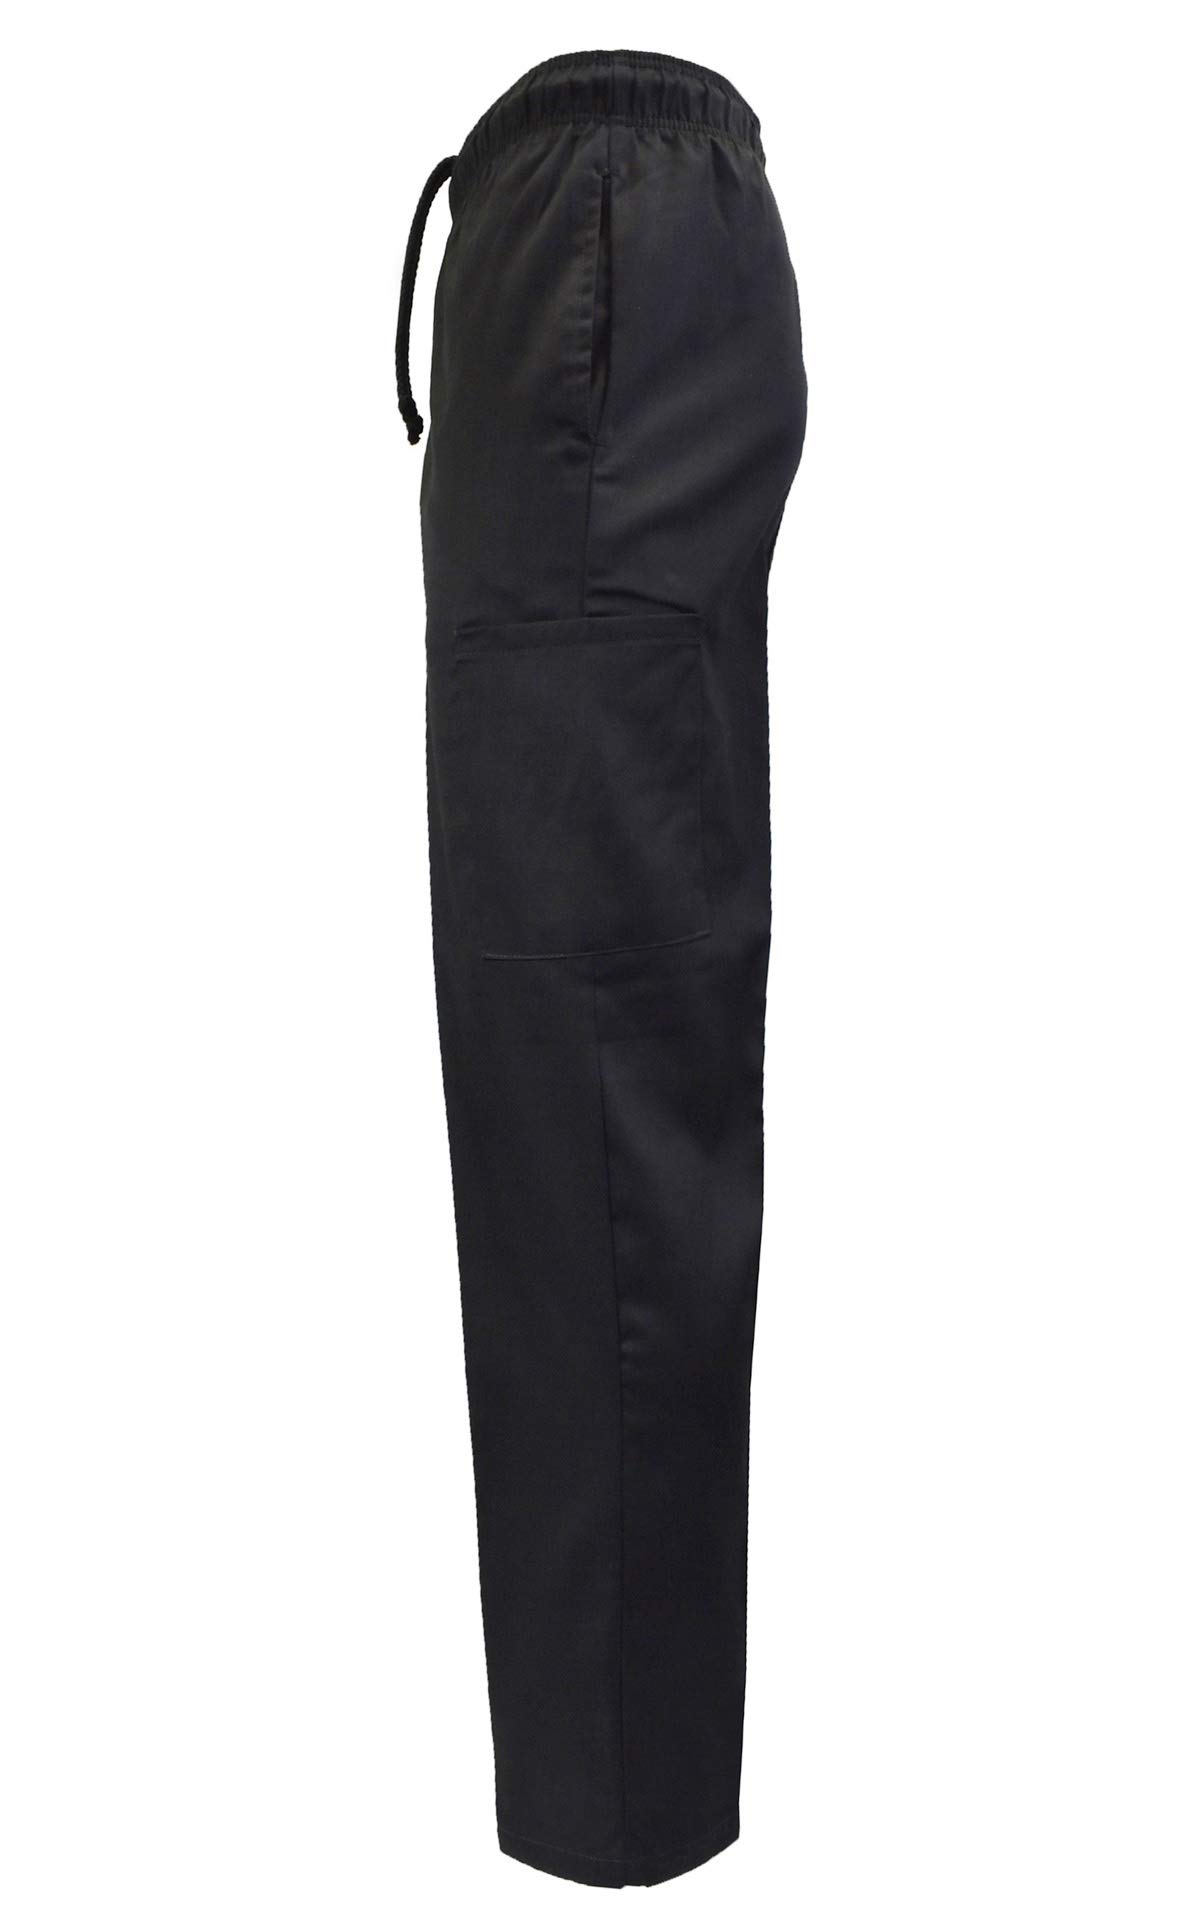 Natural Uniforms Classic 6 Pocket Black Chef Pants with Multi-Pack Quantities Available (3, Medium)